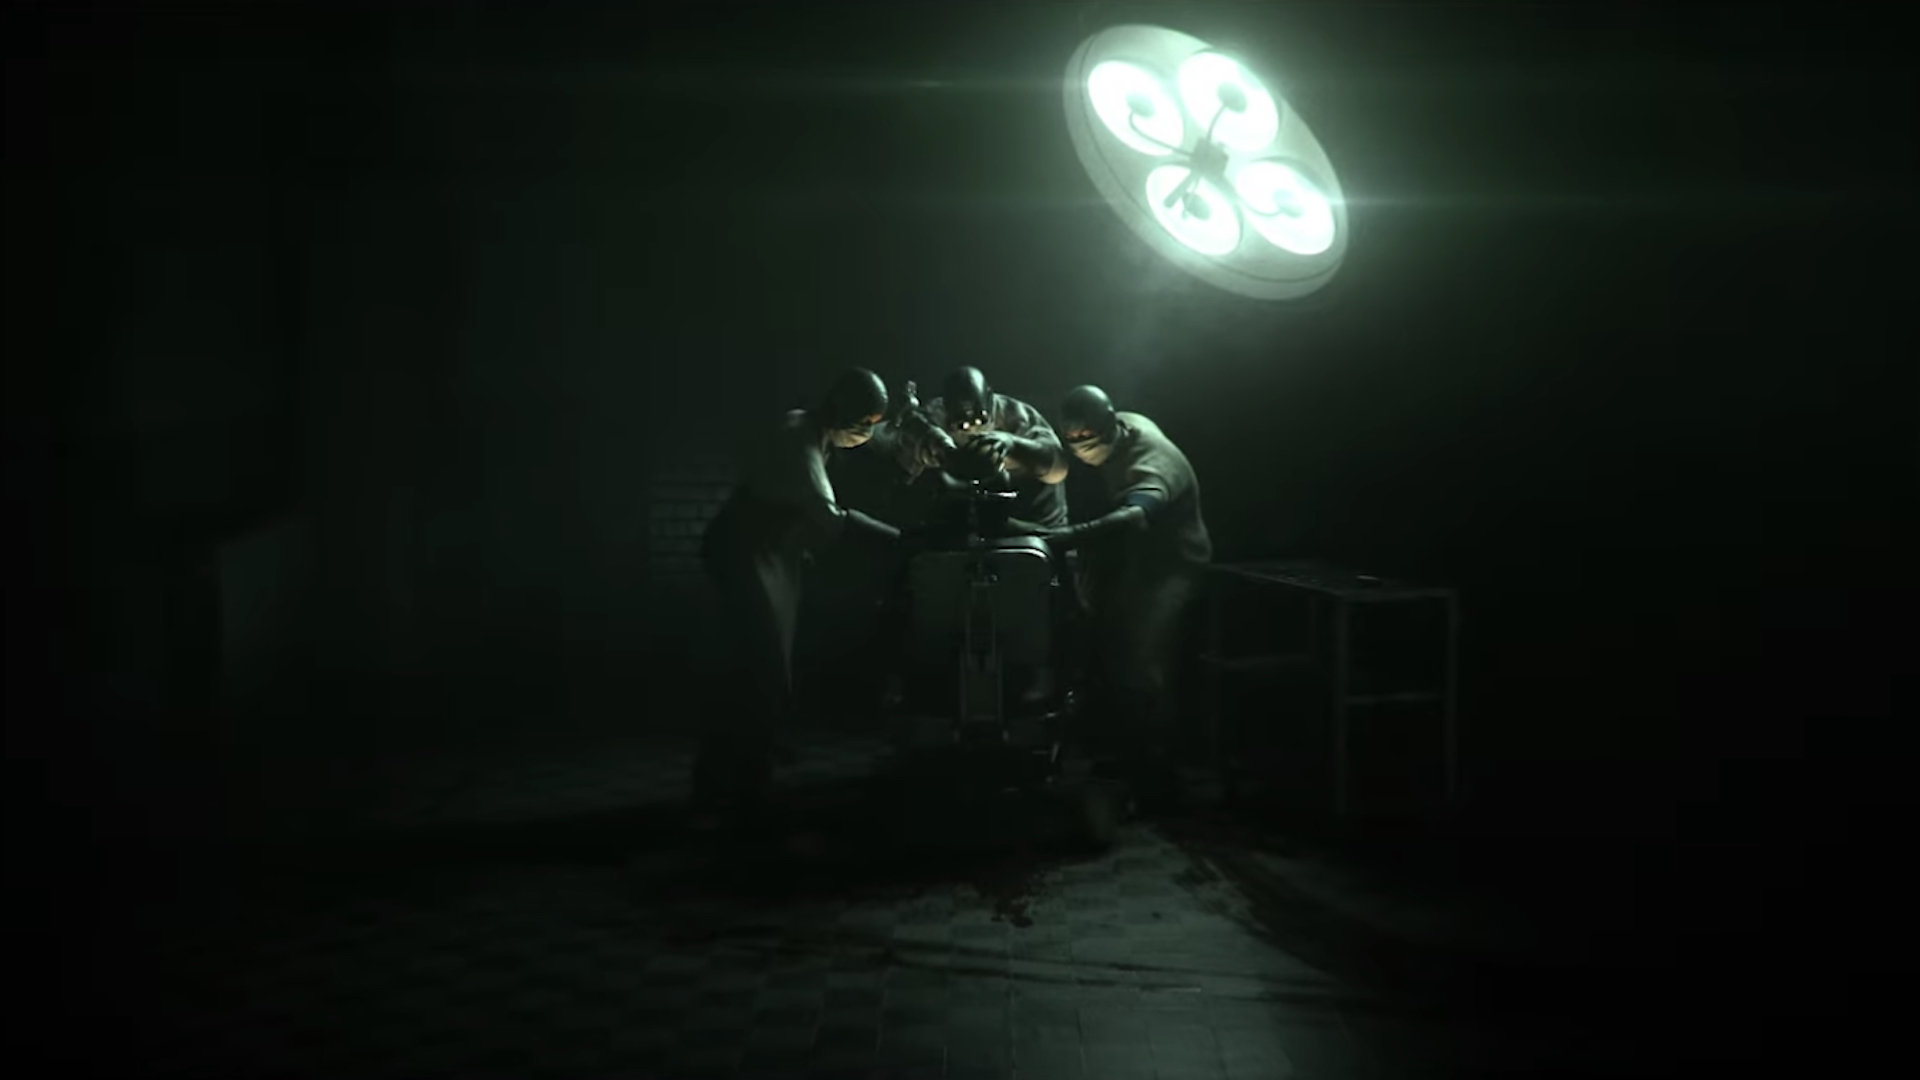 The Outlast Trials Will Resurface at Gamescom Opening Night Live